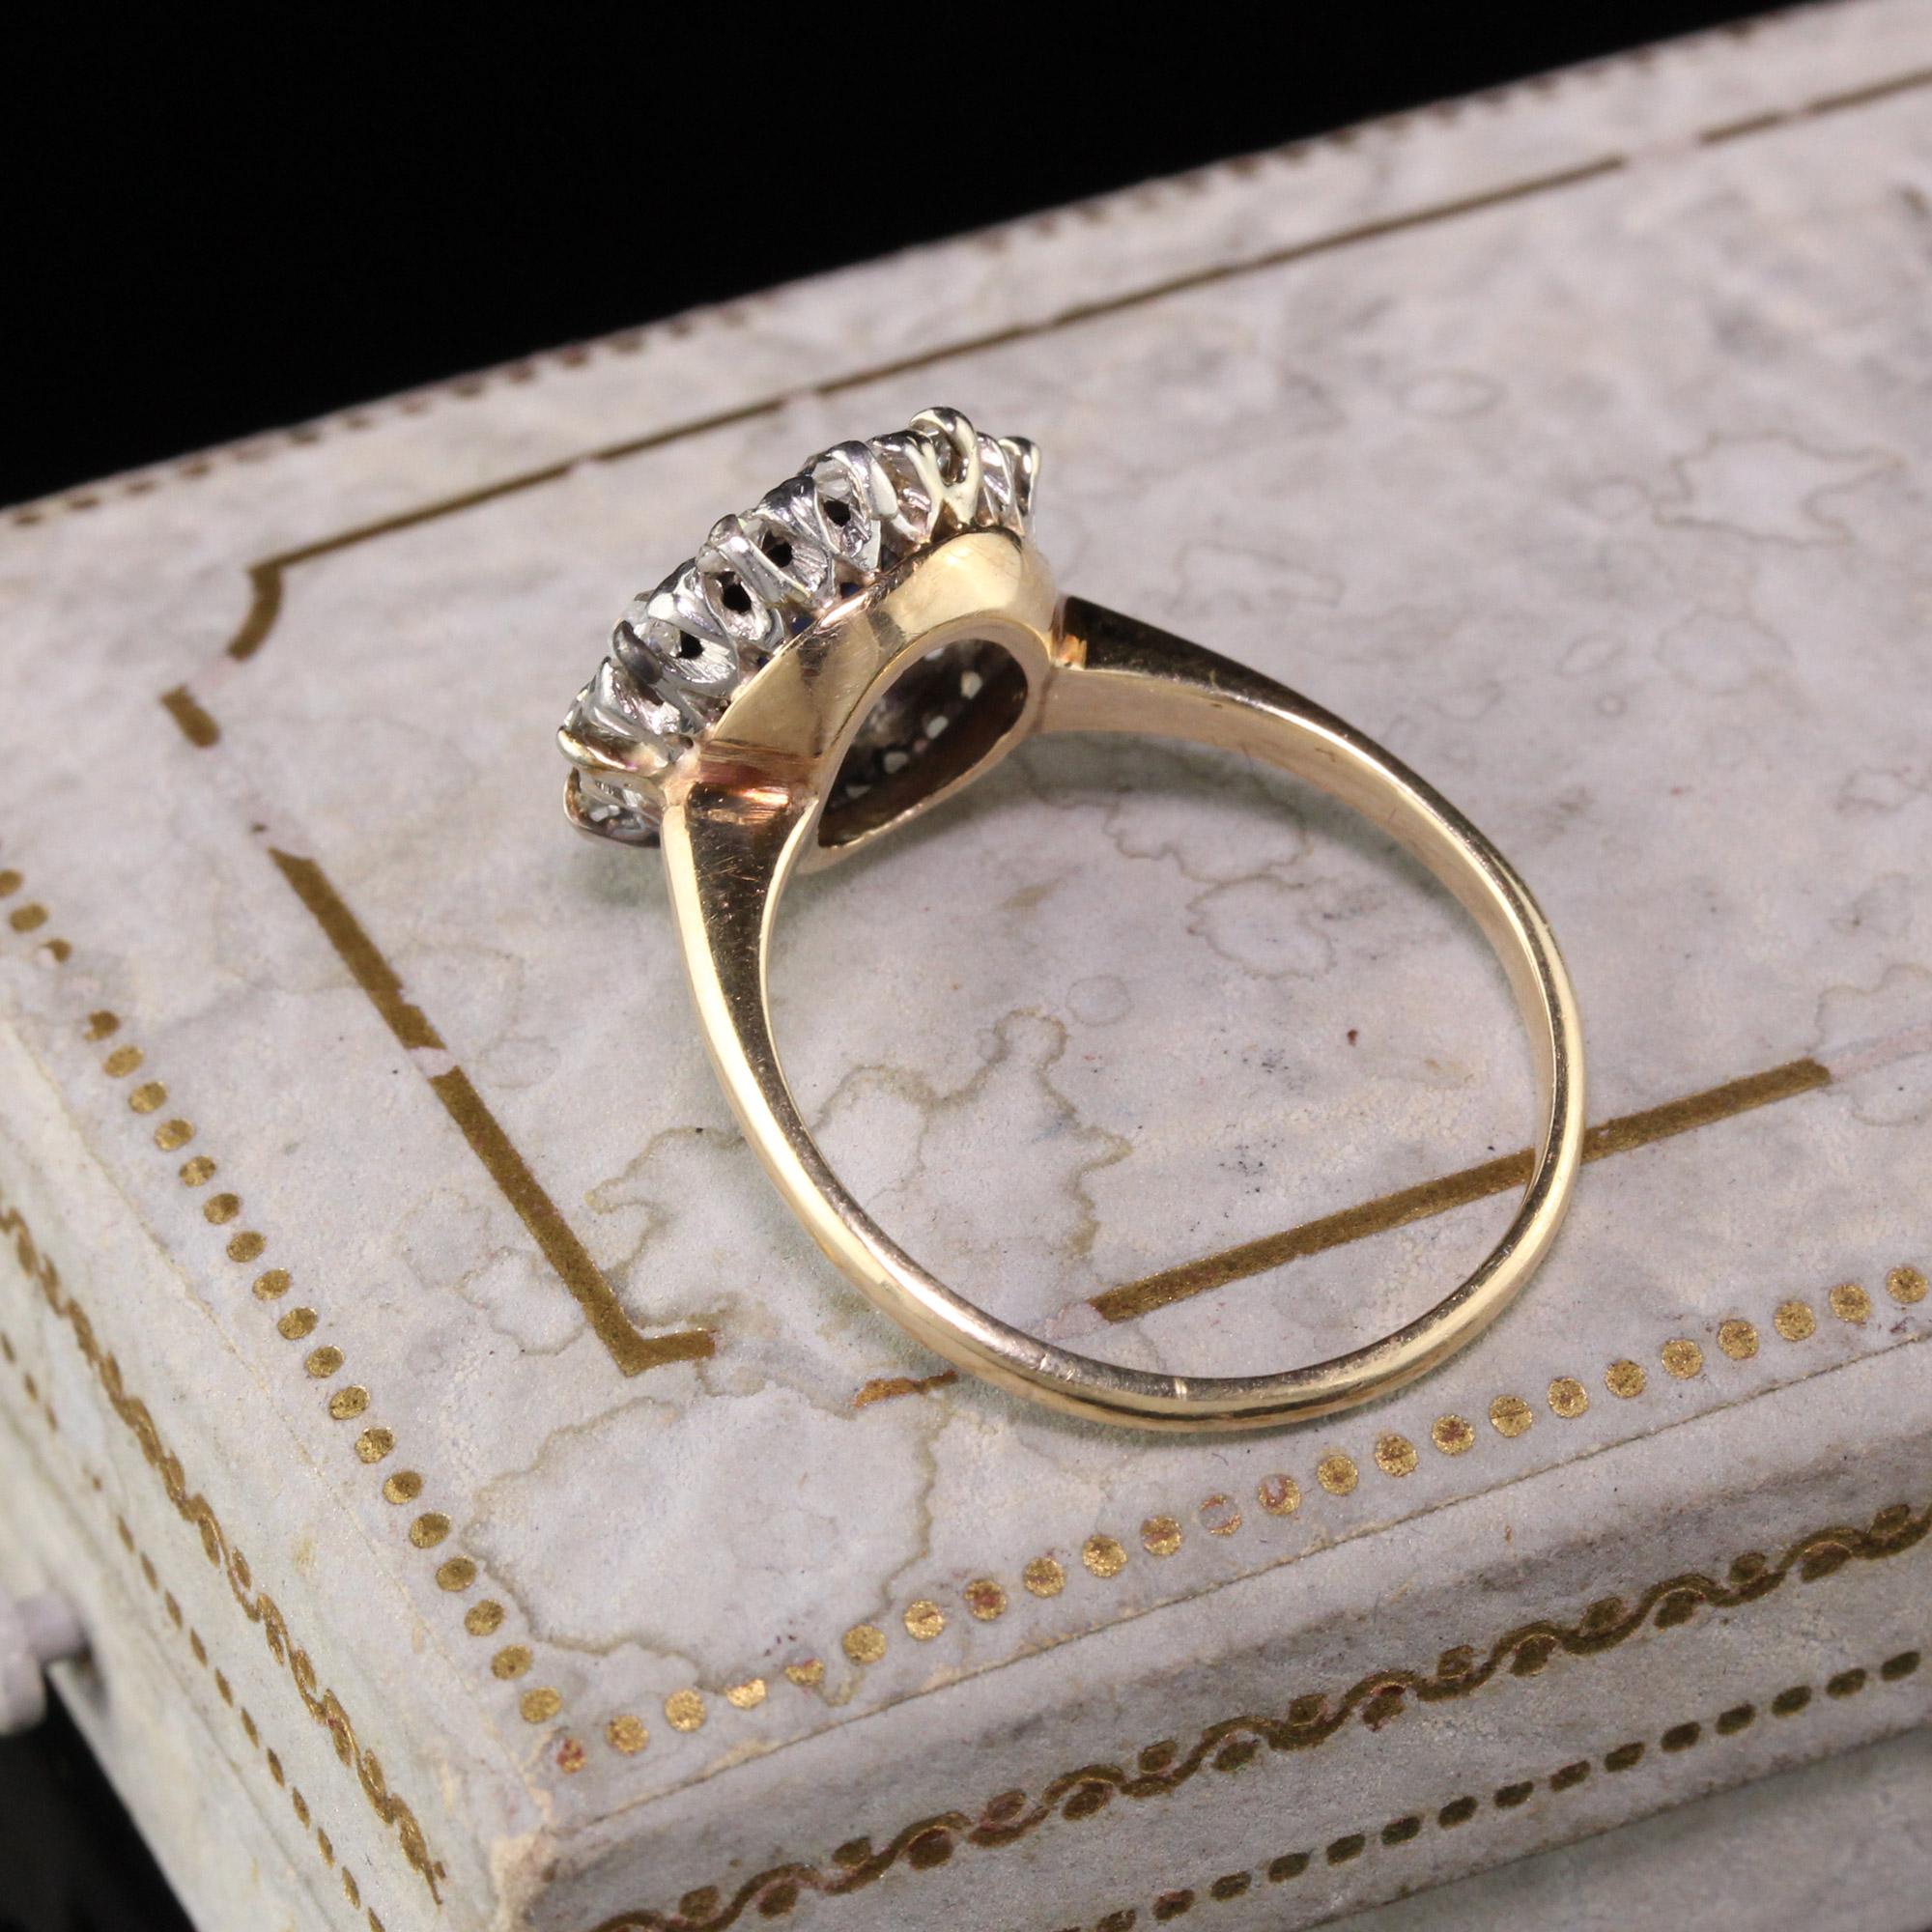 Beautiful Antique Victorian 14K Yellow Gold Old Mine Cut Diamond Sapphire Engagement Ring. This beautiful Victorian ring has a synthetic sapphire in the center surrounded by old mine cut diamonds. Synthetic stones were commonly used on many period